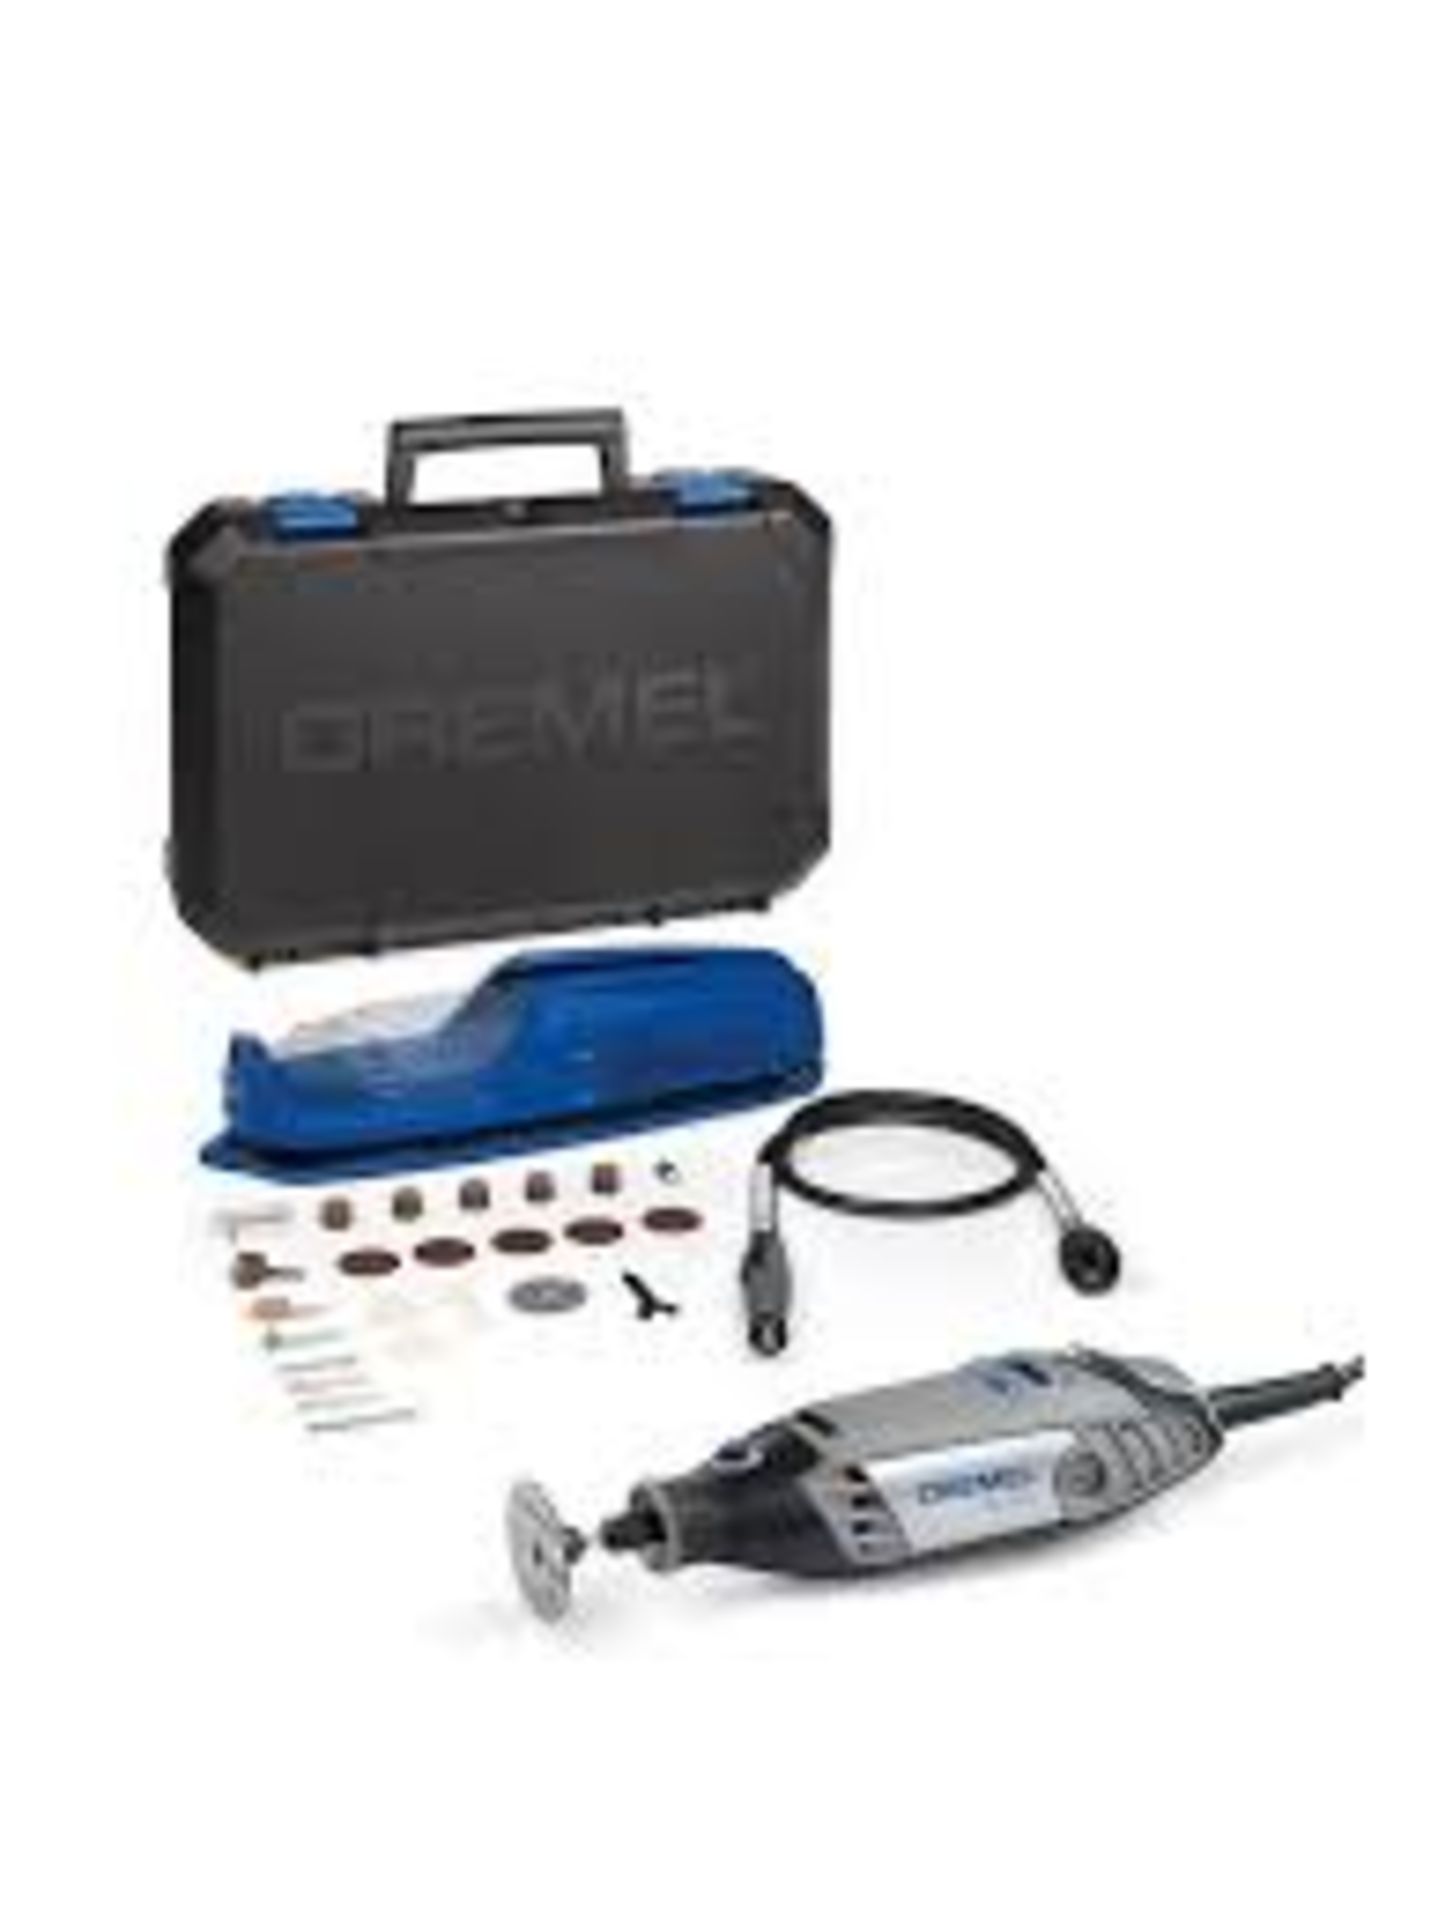 Dremel 3000-1/25 Multi-Tool Kit, EZ Wrap Case. - PW. Work on your DIY projects comfortably for